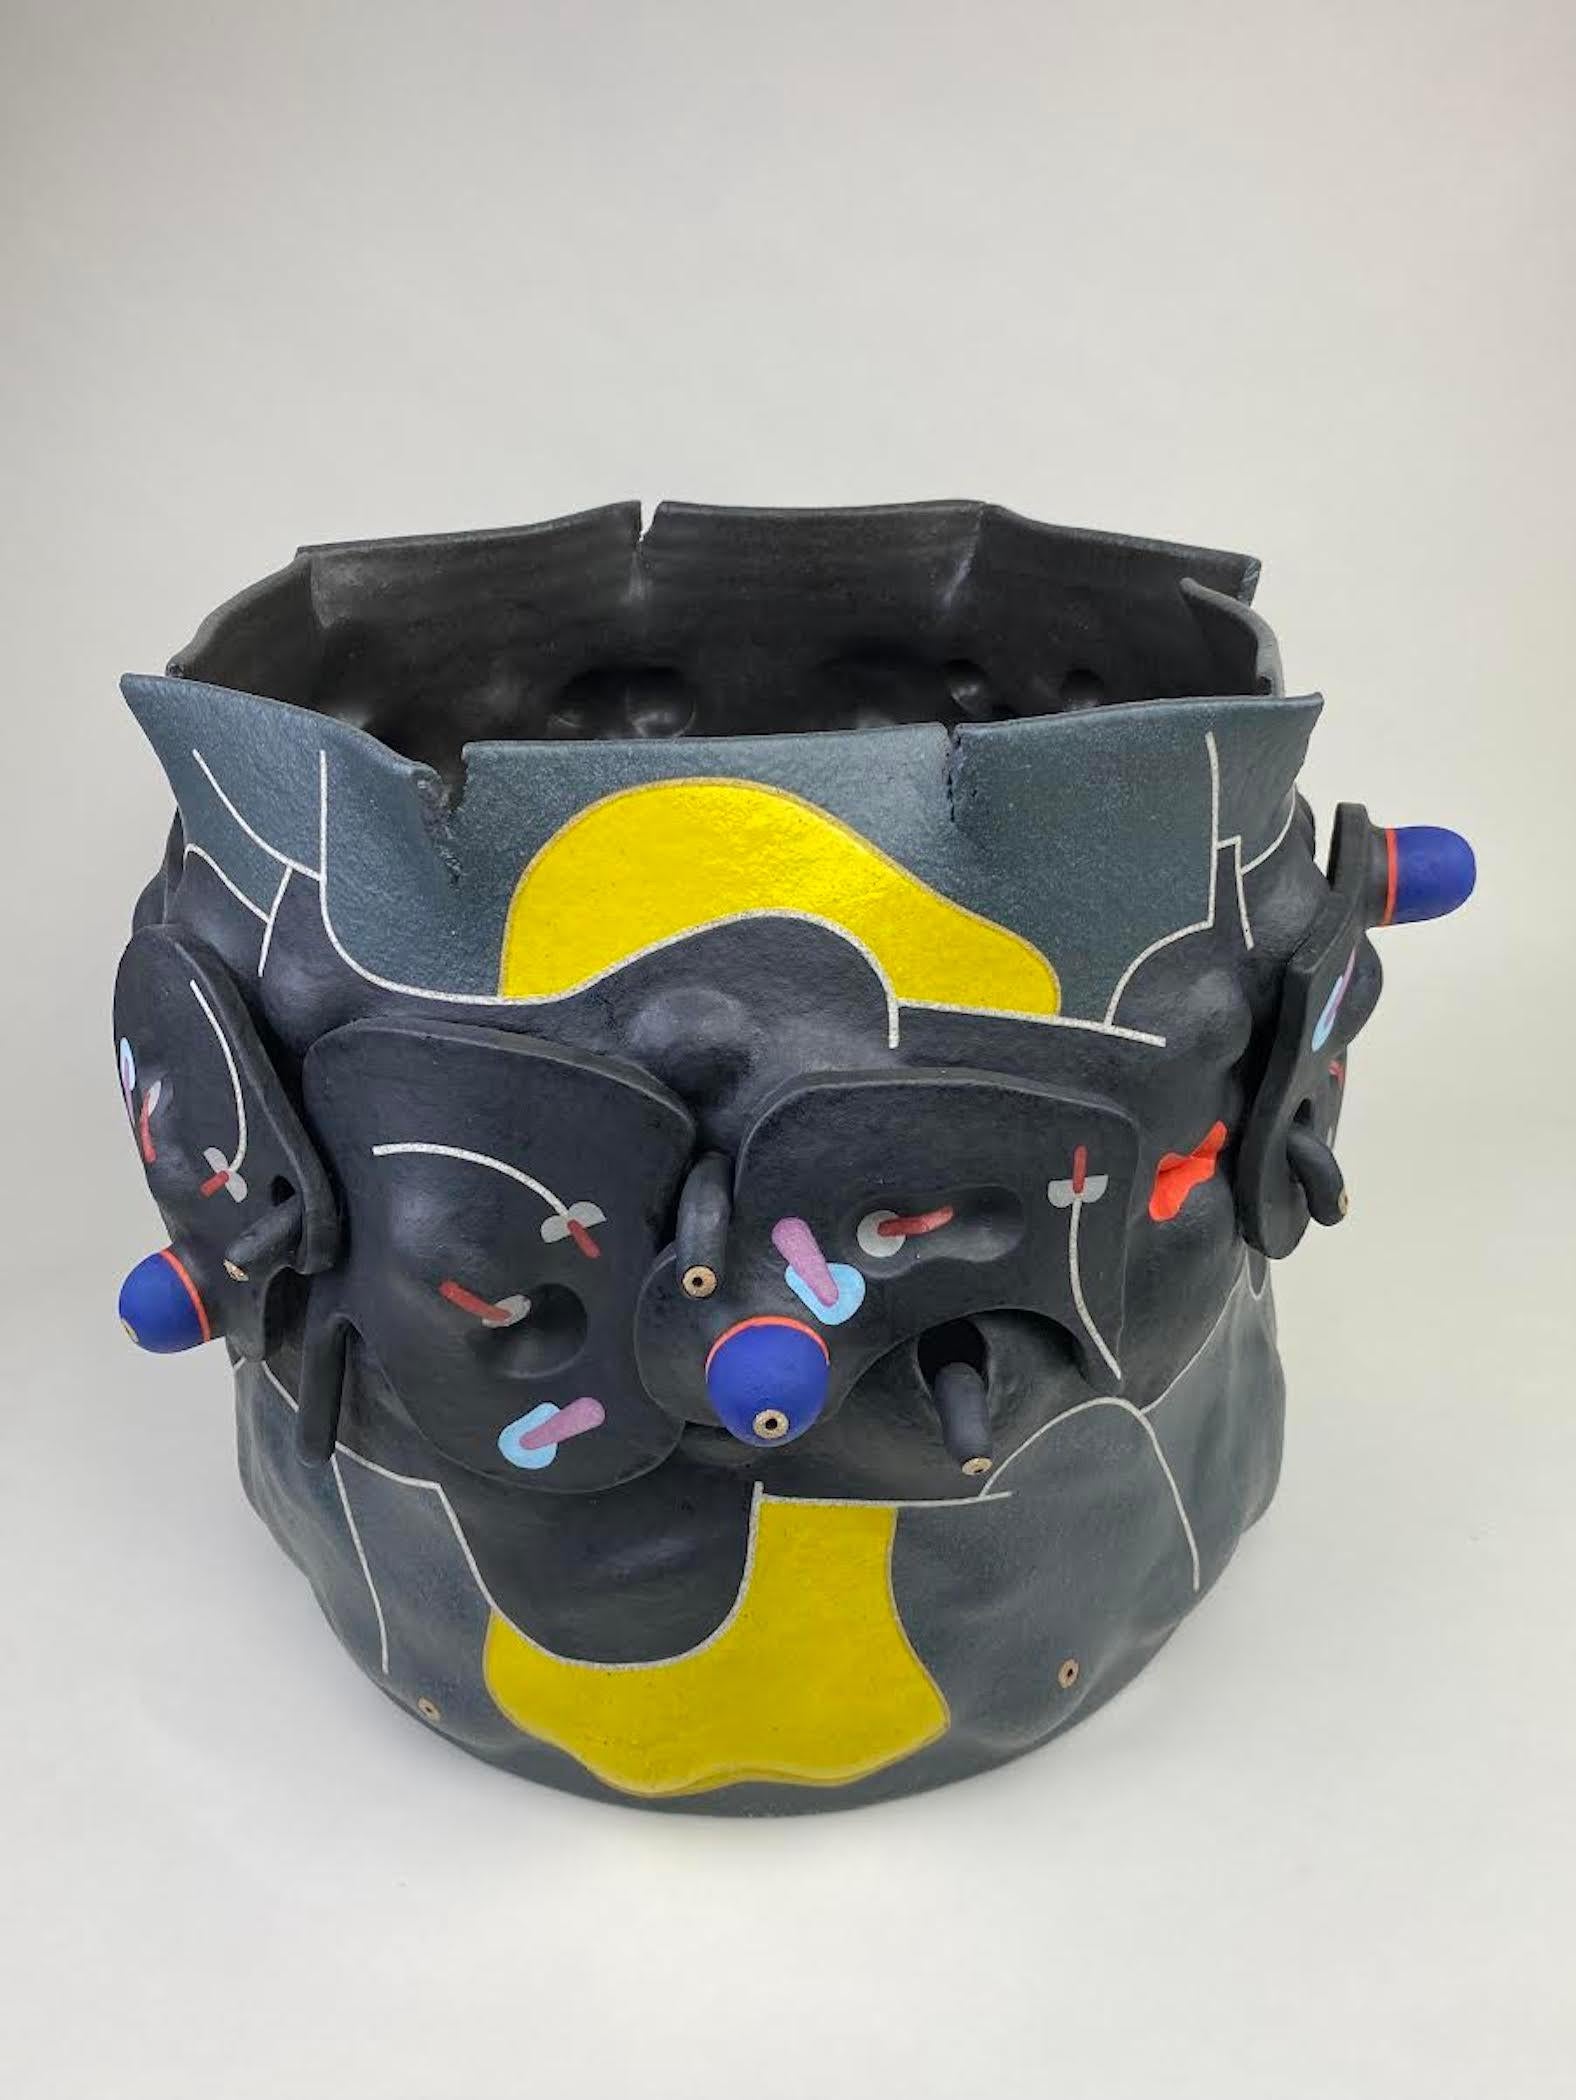 "MD15", Contemporary, Abstract, Ceramic, Sculpture, Colorful, Vessel Form